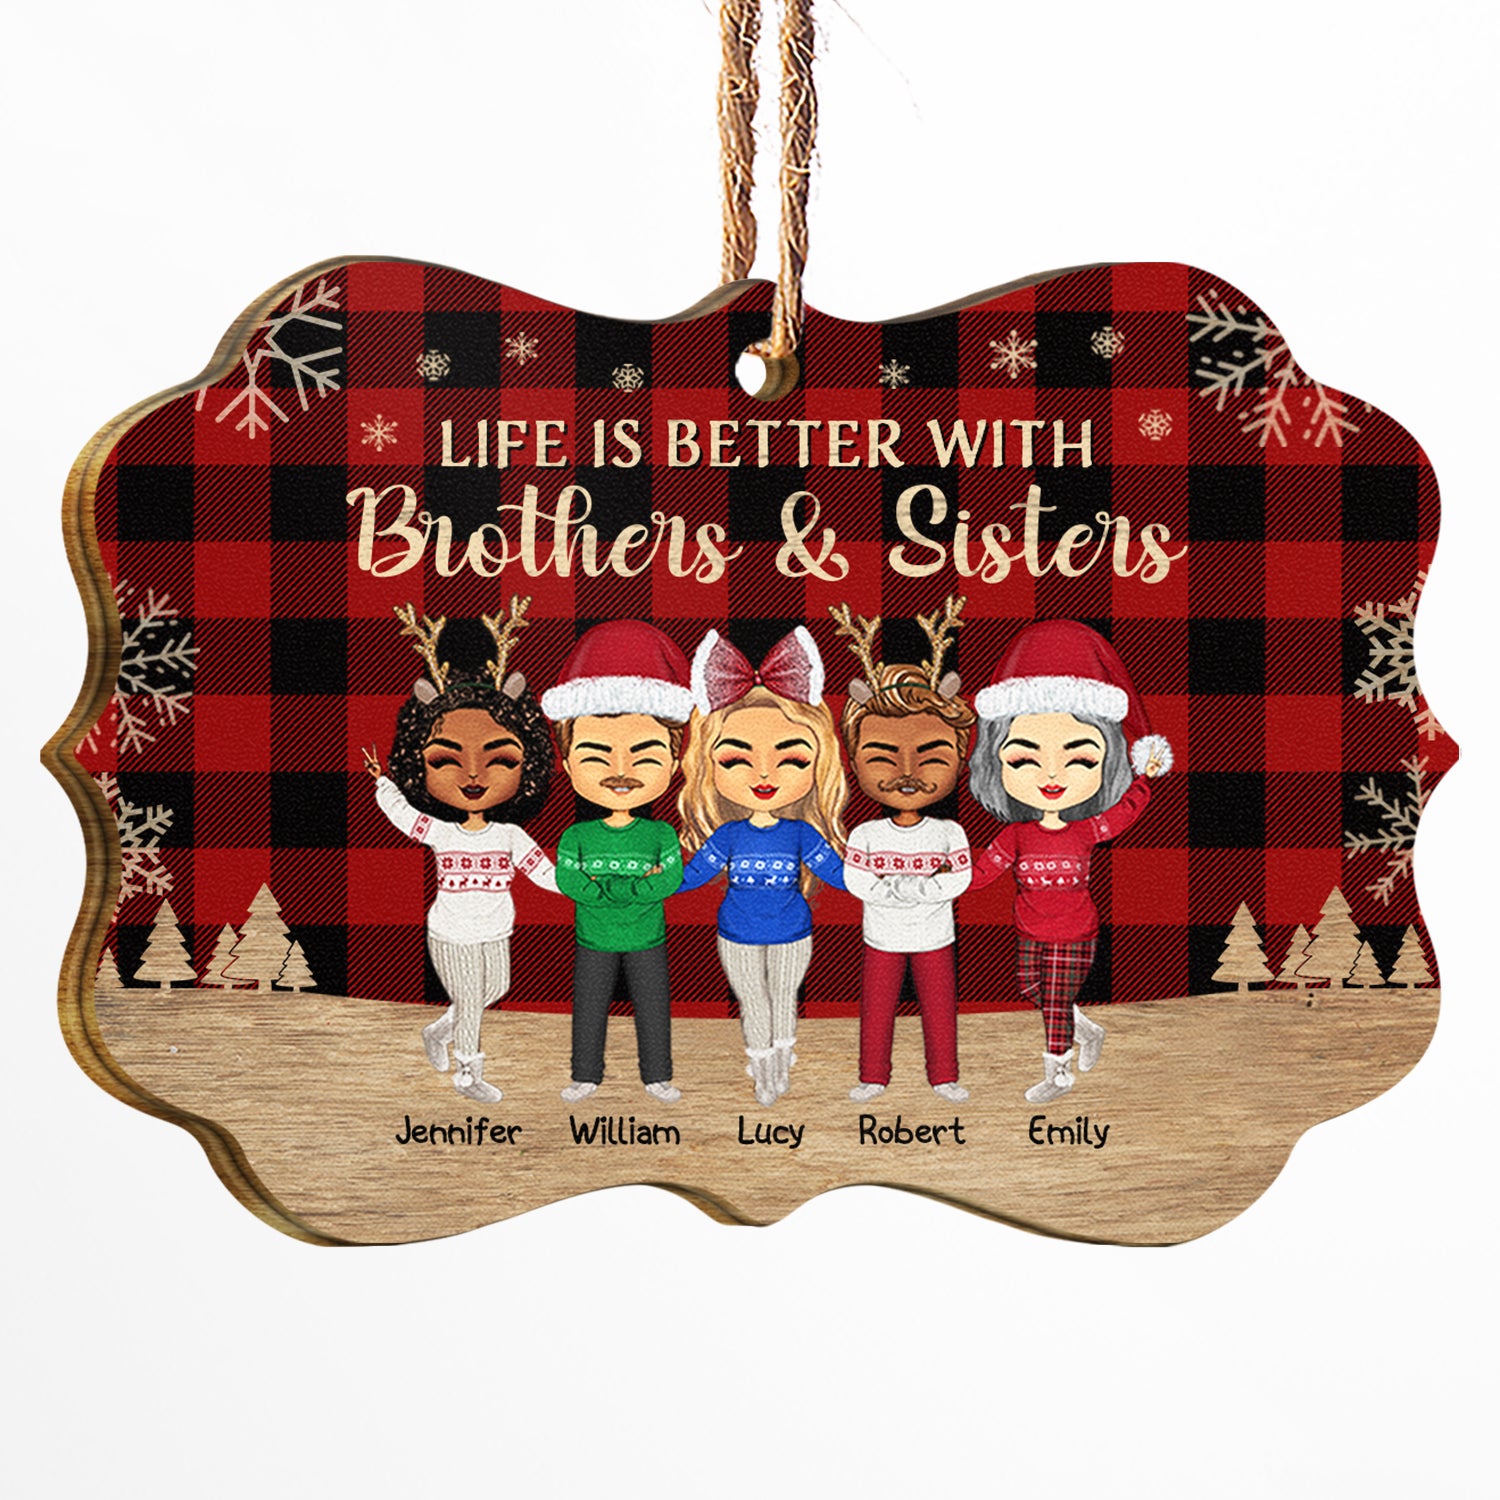 Life Is Better With Sisters And Brothers, Best Friends - Christmas Gift - Personalized Wooden Ornament